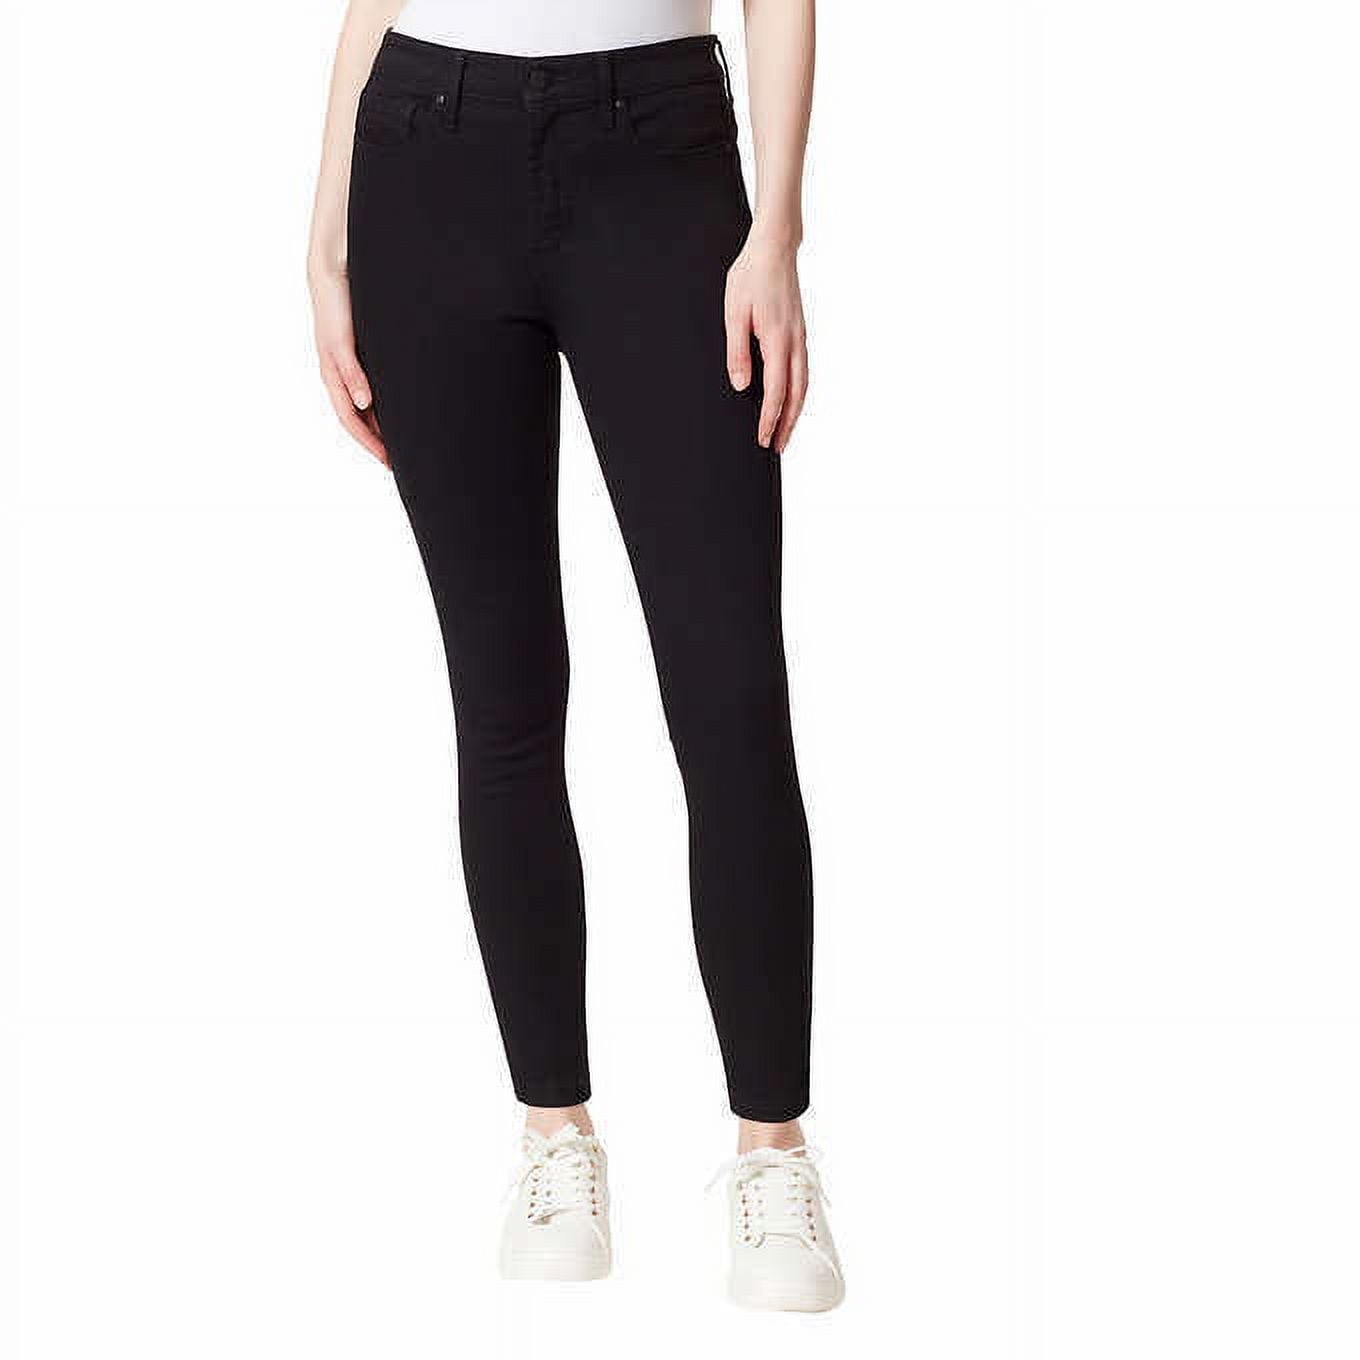 Jessica Simpson Womens High Rise Skinny Jeans 